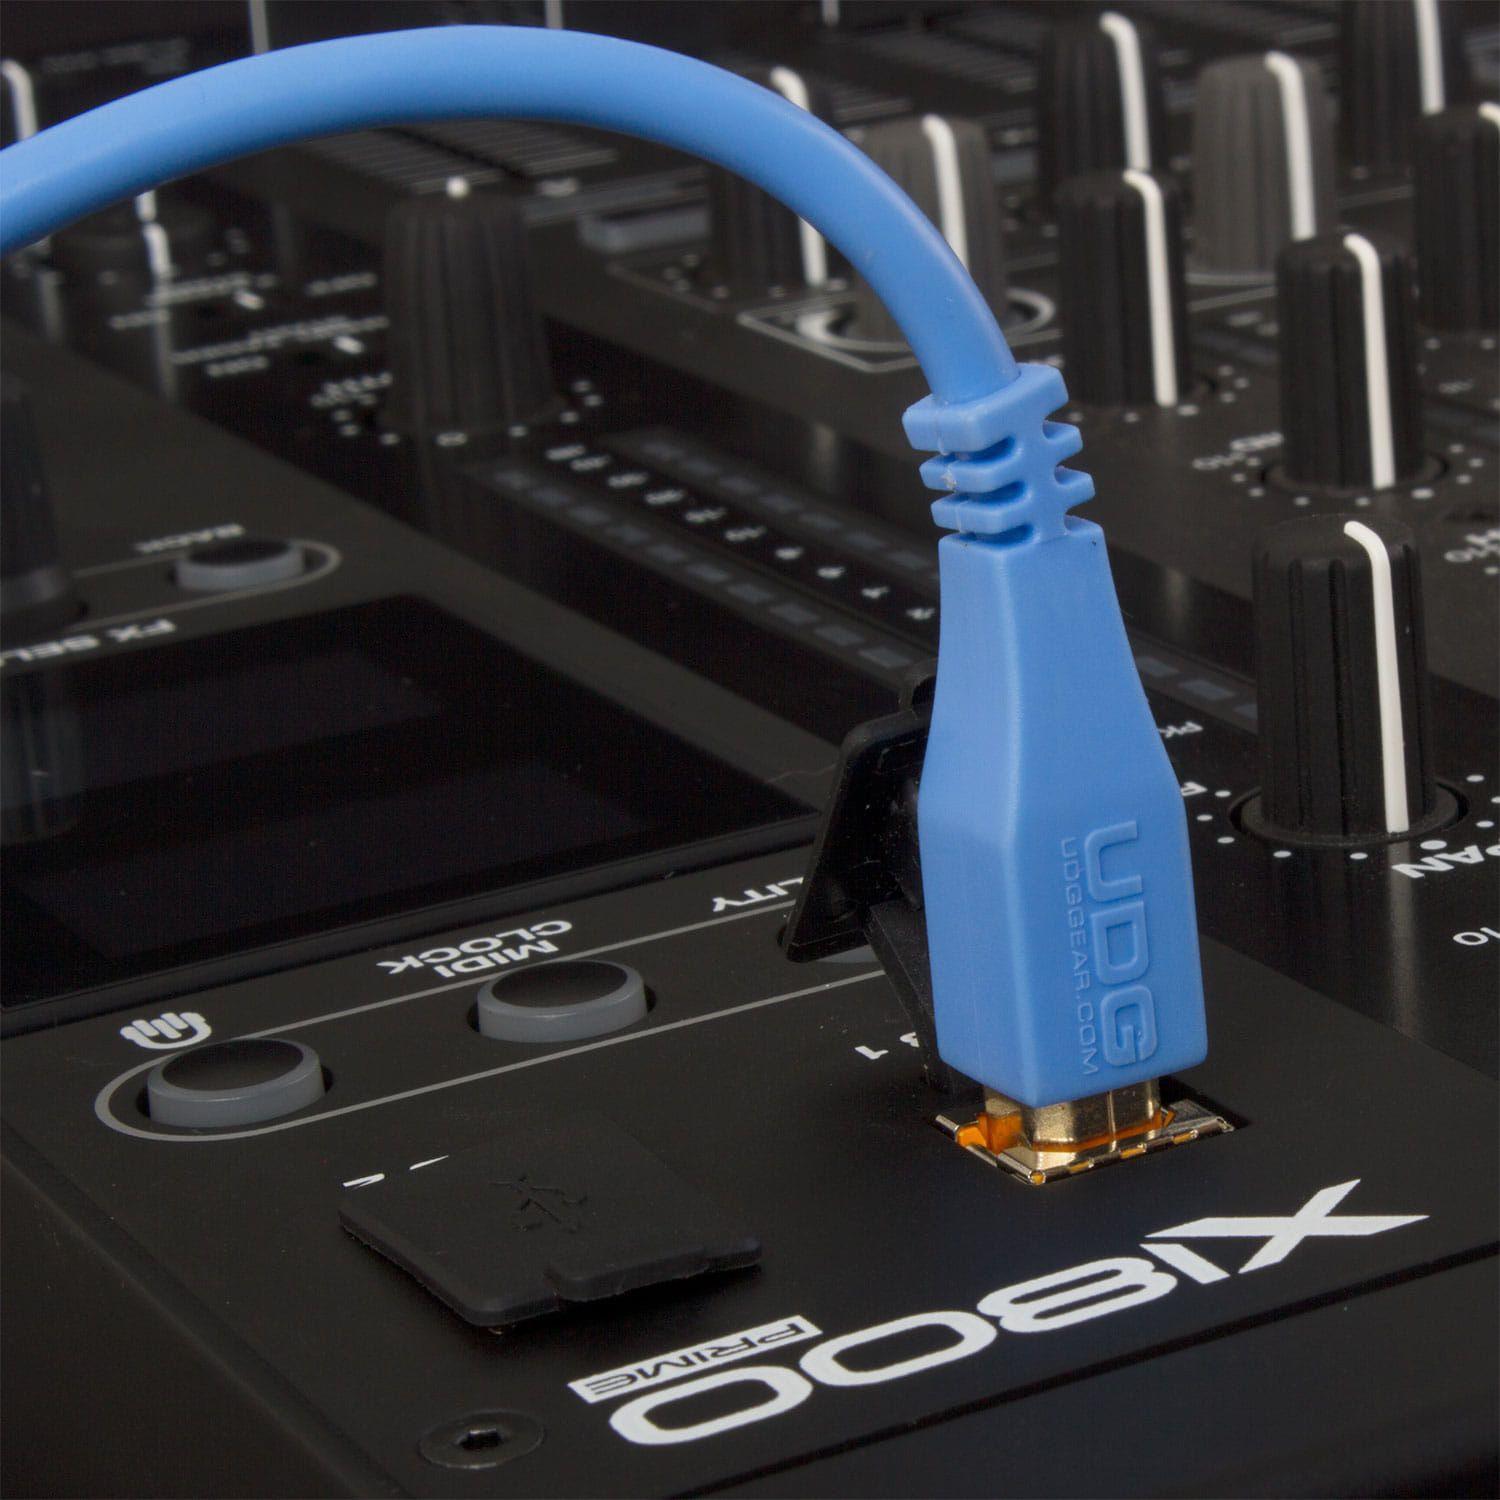 UDG Cable USB 2.0 (Type C-B) Straight 1.5M Blue - DY Pro Audio